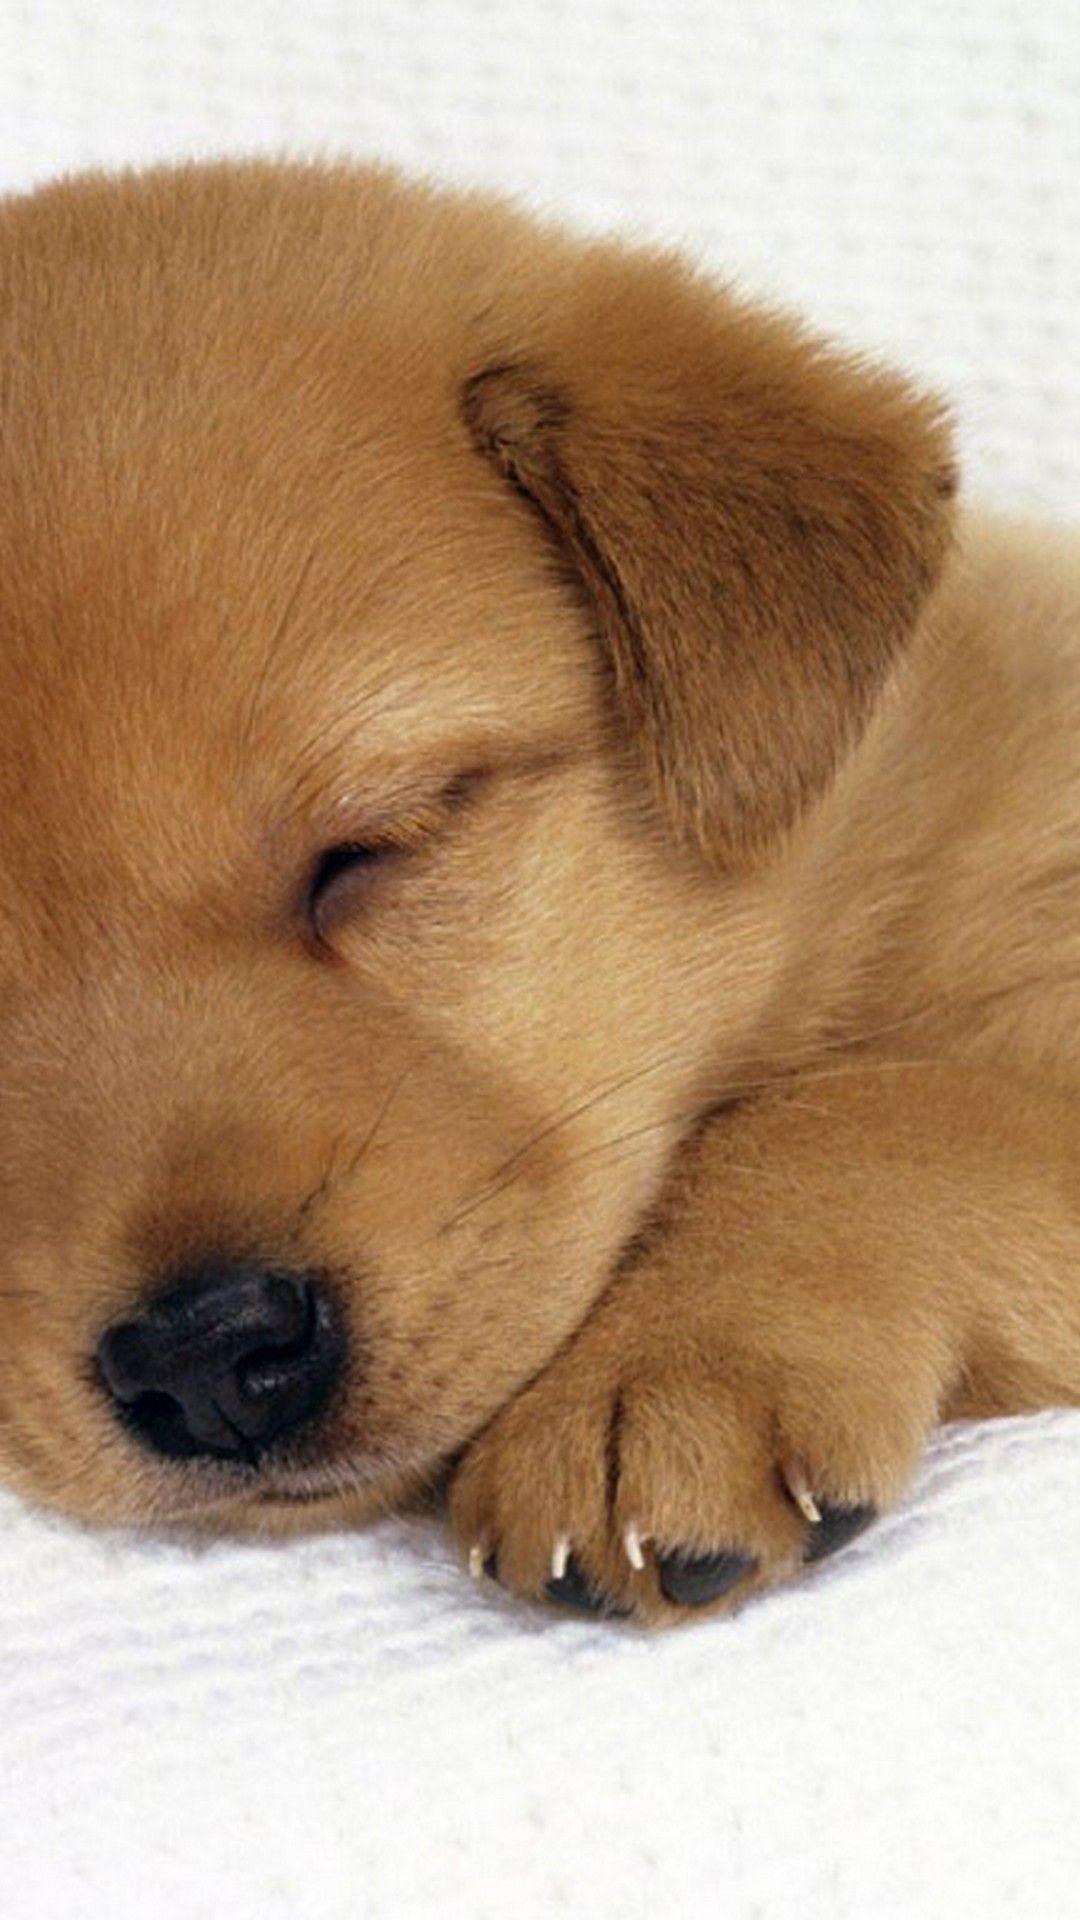 Wallpaper Tiny Cute Puppies Wallpapers